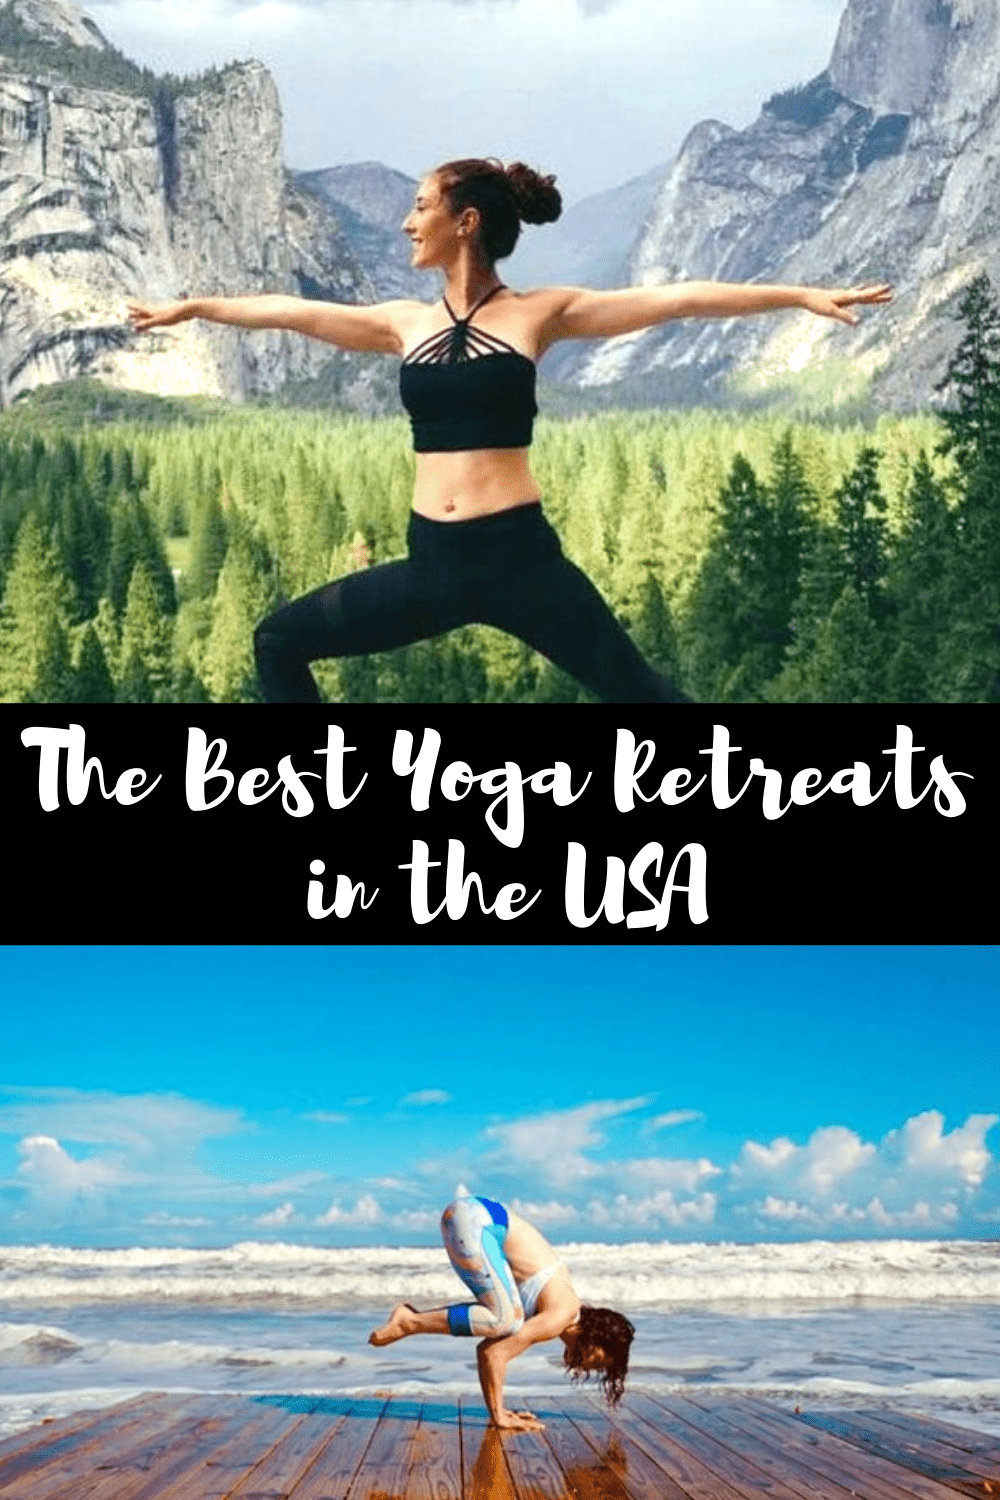 The Best Yoga Retreats in the USA